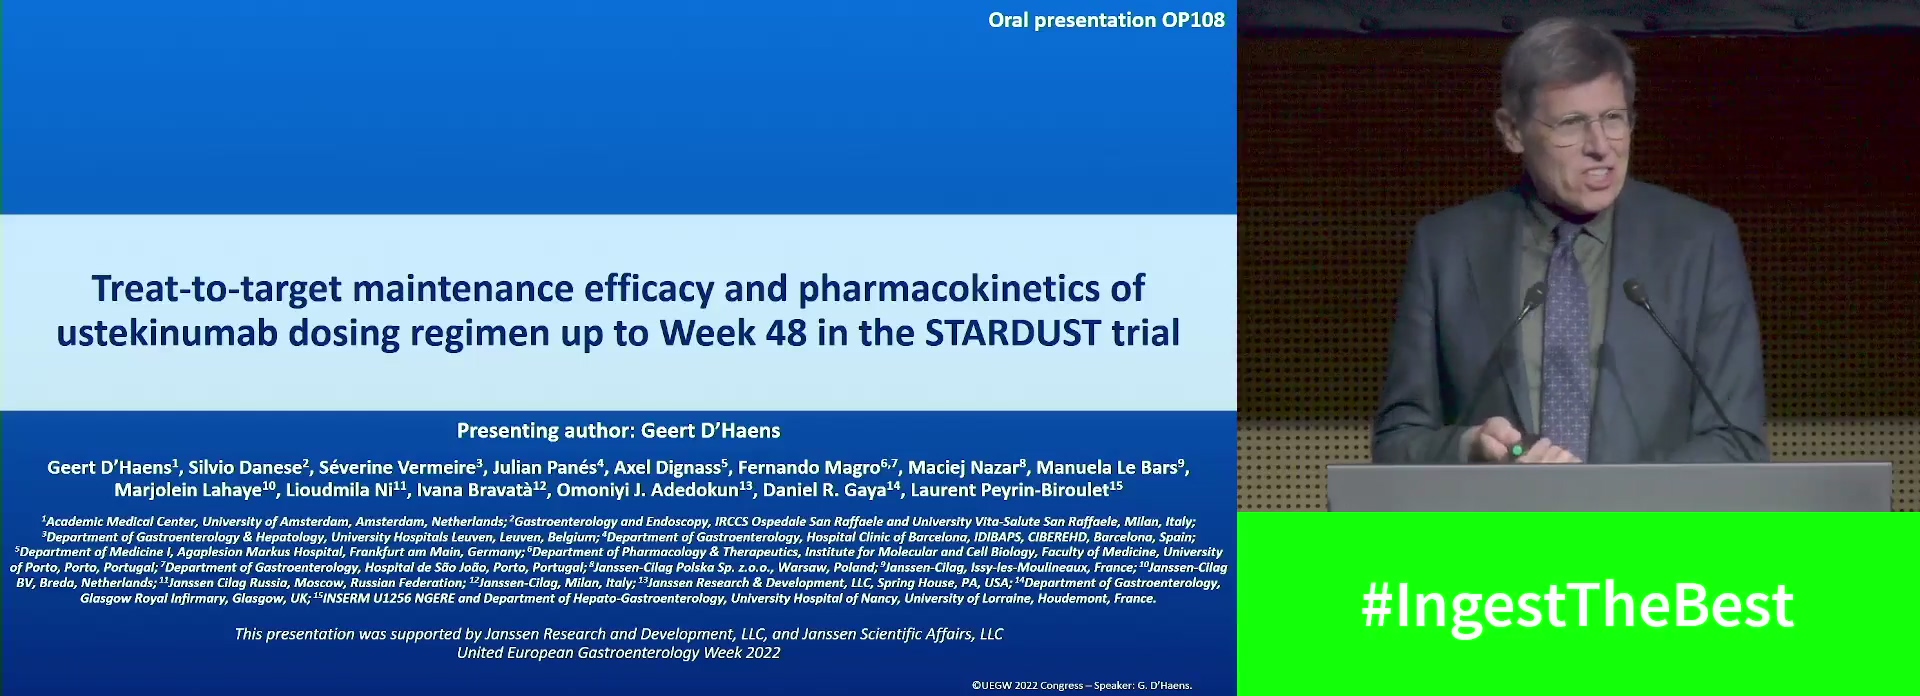 TREAT-TO-TARGET MAINTENANCE EFFICACY AND PHARMACOKINETICS OF USTEKINUMAB DOSING REGIMEN UP TO WEEK 48 IN THE STARDUST TRIAL